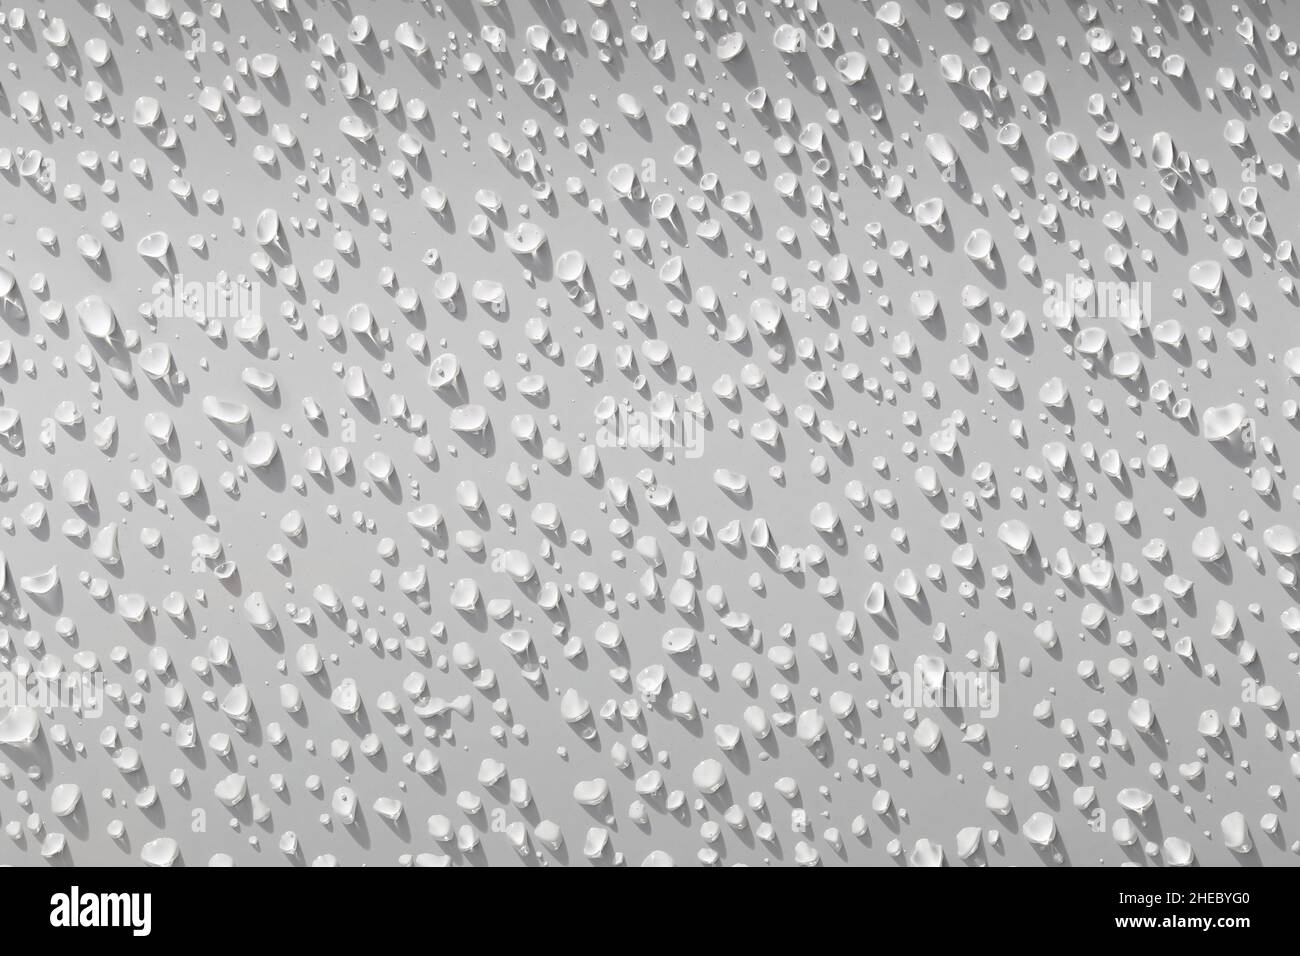 Water droplets on a white background with shadows from the light shining down on them,Abstract background image in the concept of art. Stock Photo